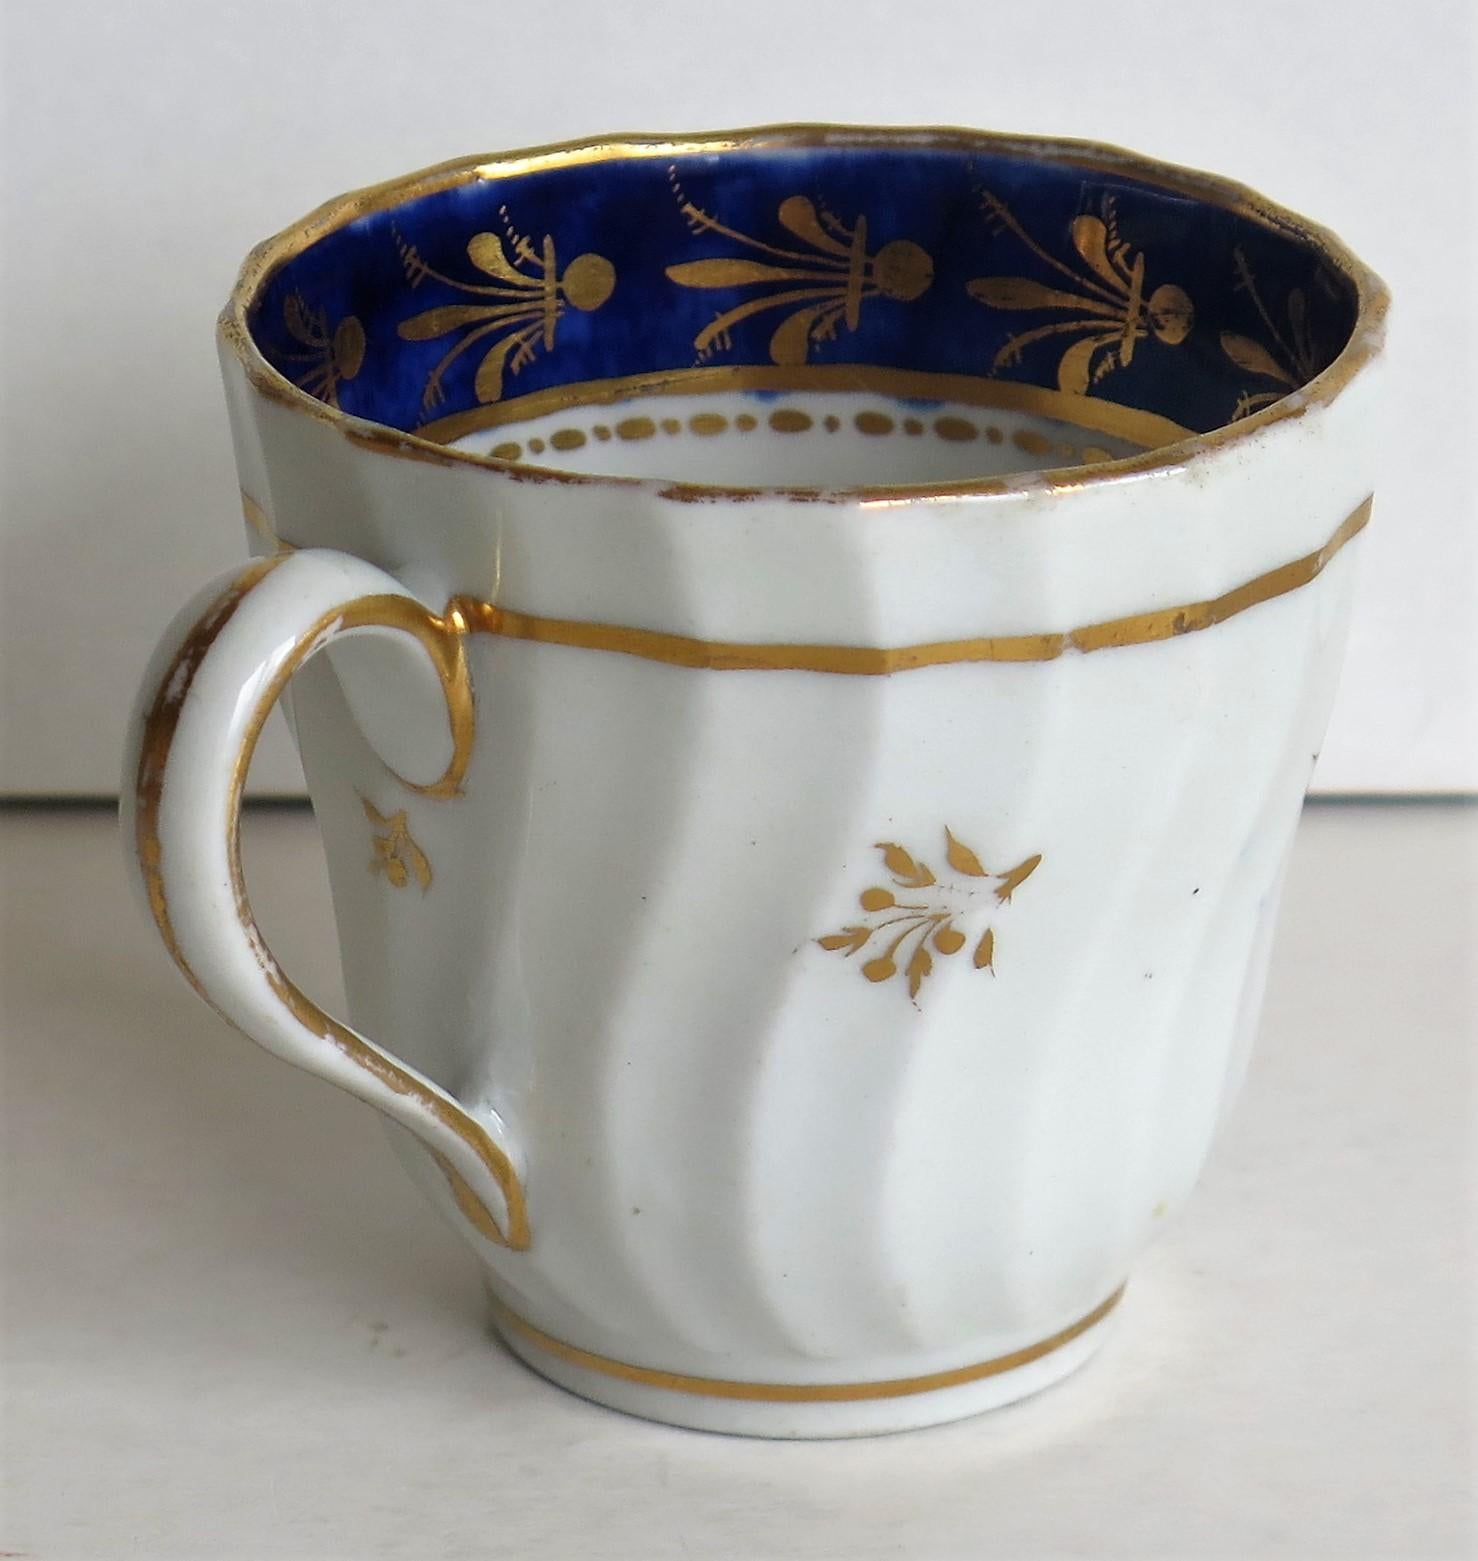 English New Hall Porcelain Coffee Cup Shanked and Fluted Body Hand-Painted, circa 1795